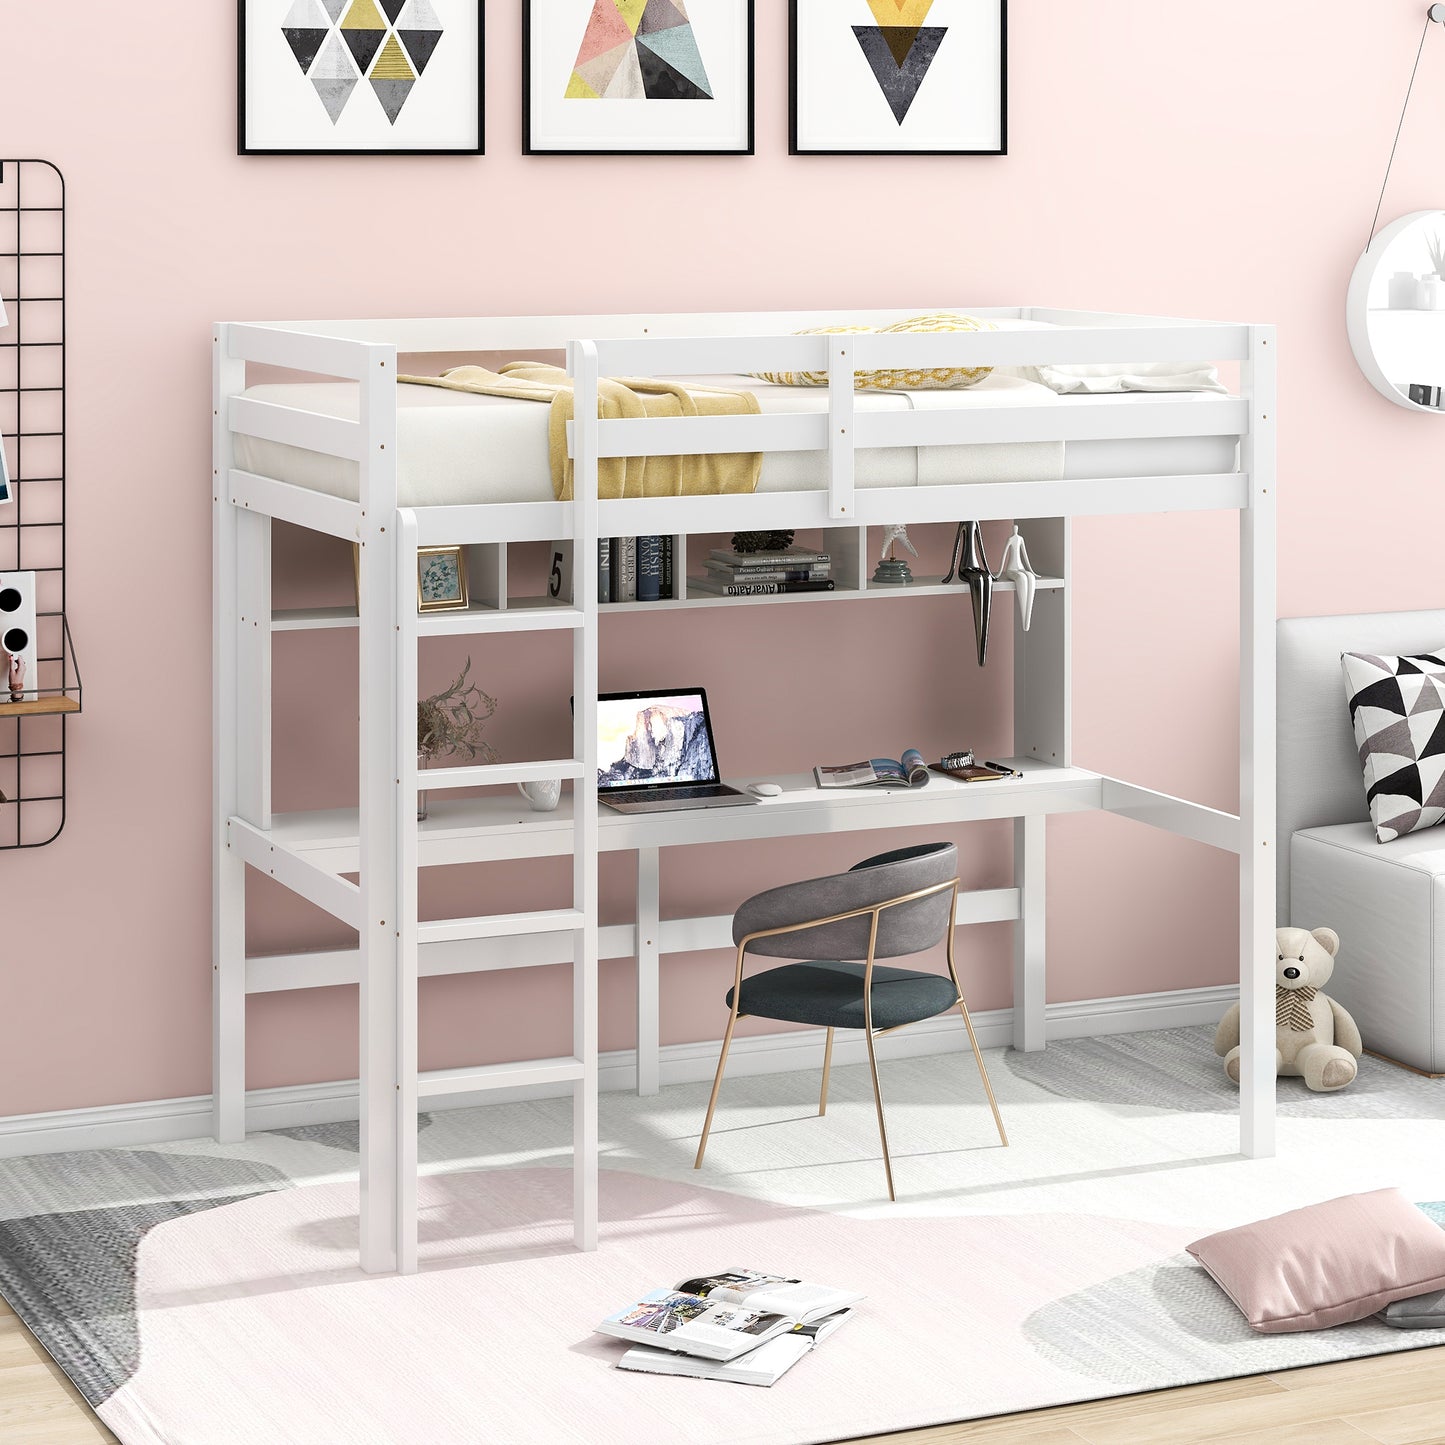 Wooden Twin Loft Bed with Desk, Twin Size Bunk Bed with Workstation Desk, Safety Rail, Wider Ladder for Kids Teens Adults, Space Saving Design, No Spring Box needed, White